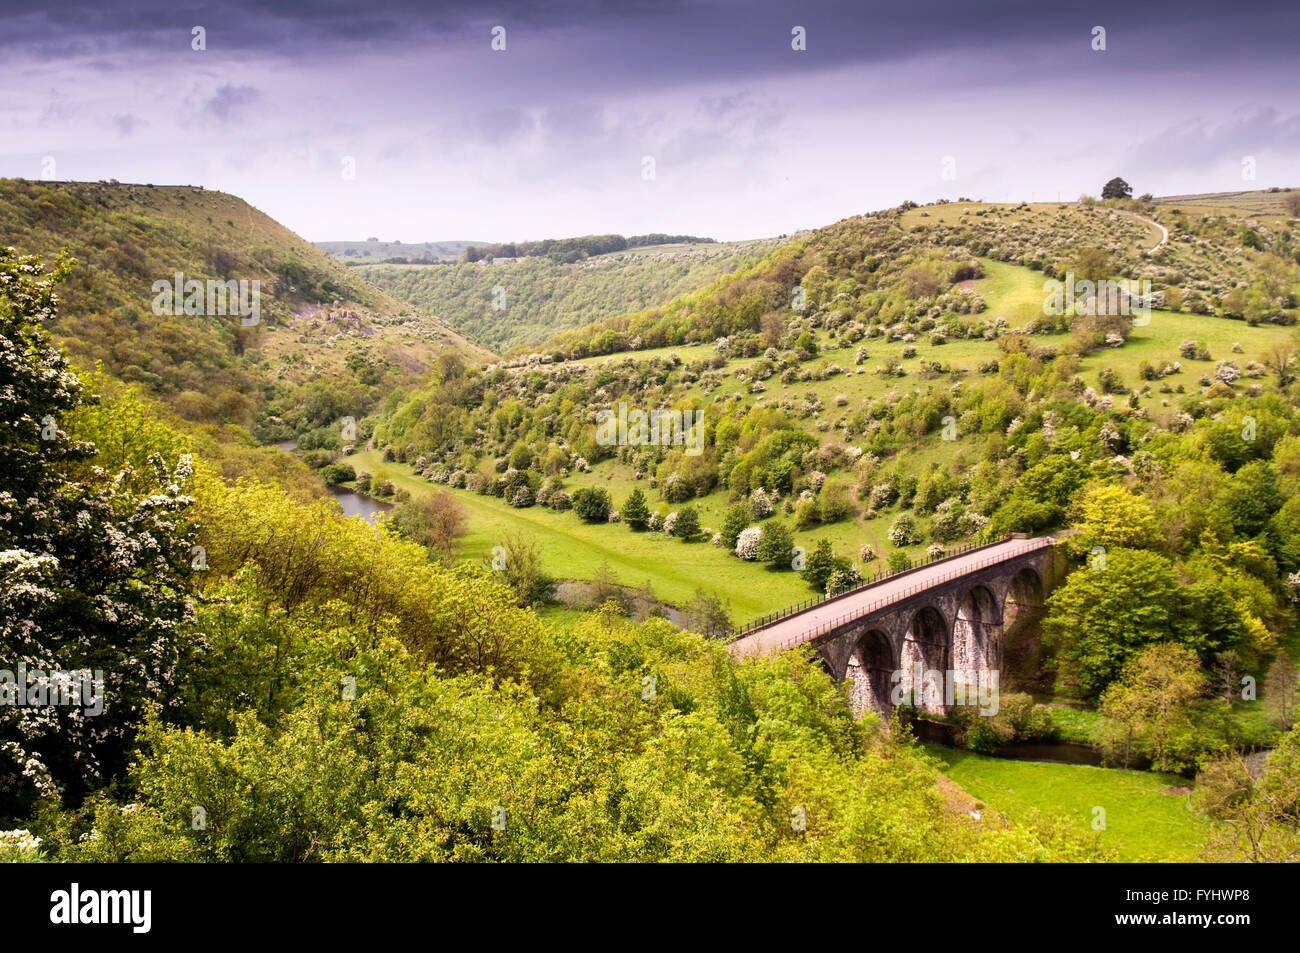 The Midland Railway Headstone Viaduct, now part of the Monsal Trail cycleway, in Monsal Dale in England's Peak District. Stock Photo